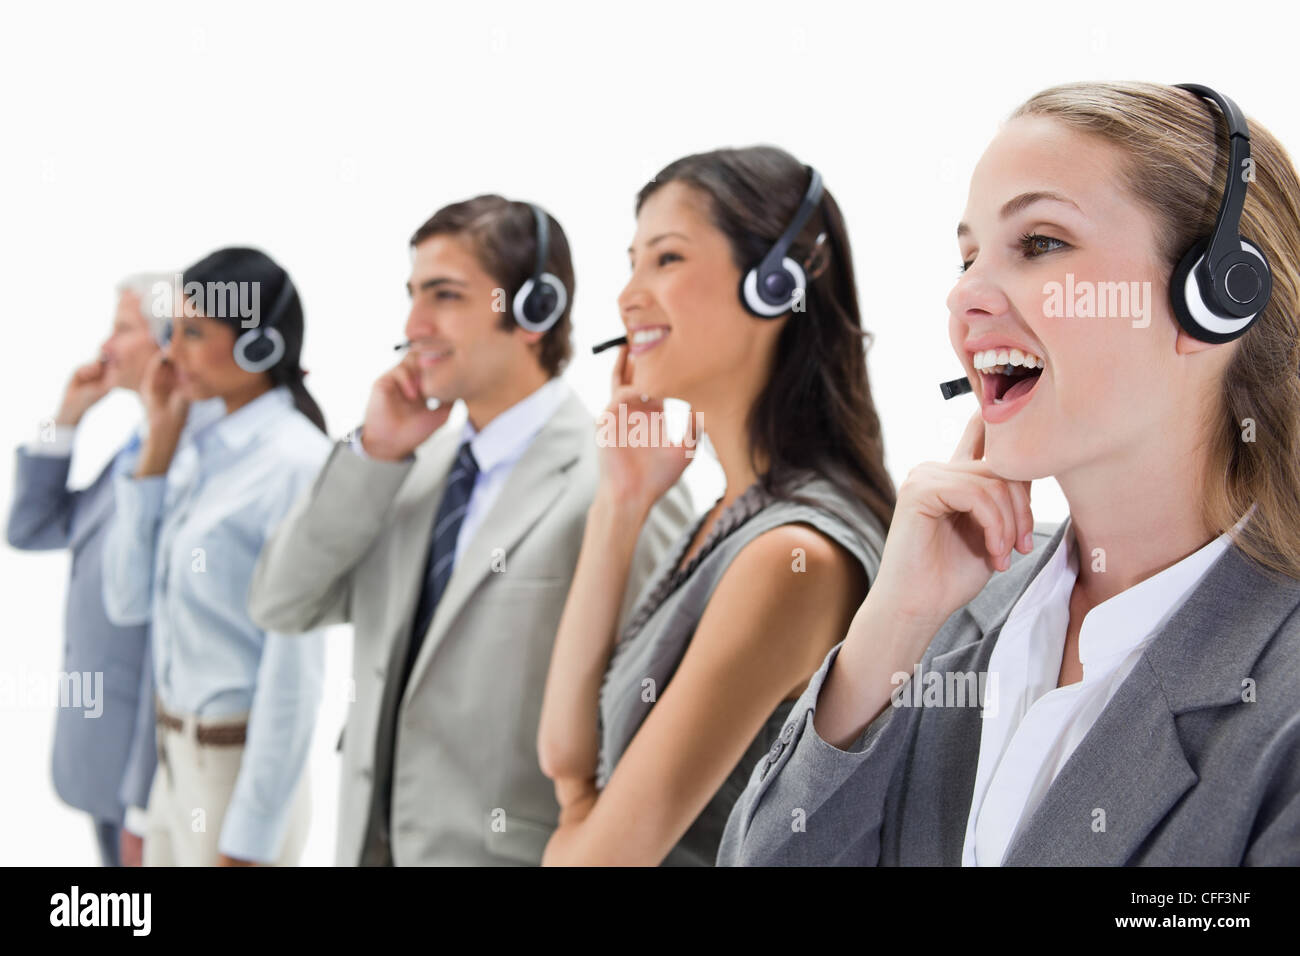 Professionals with headsets Stock Photo